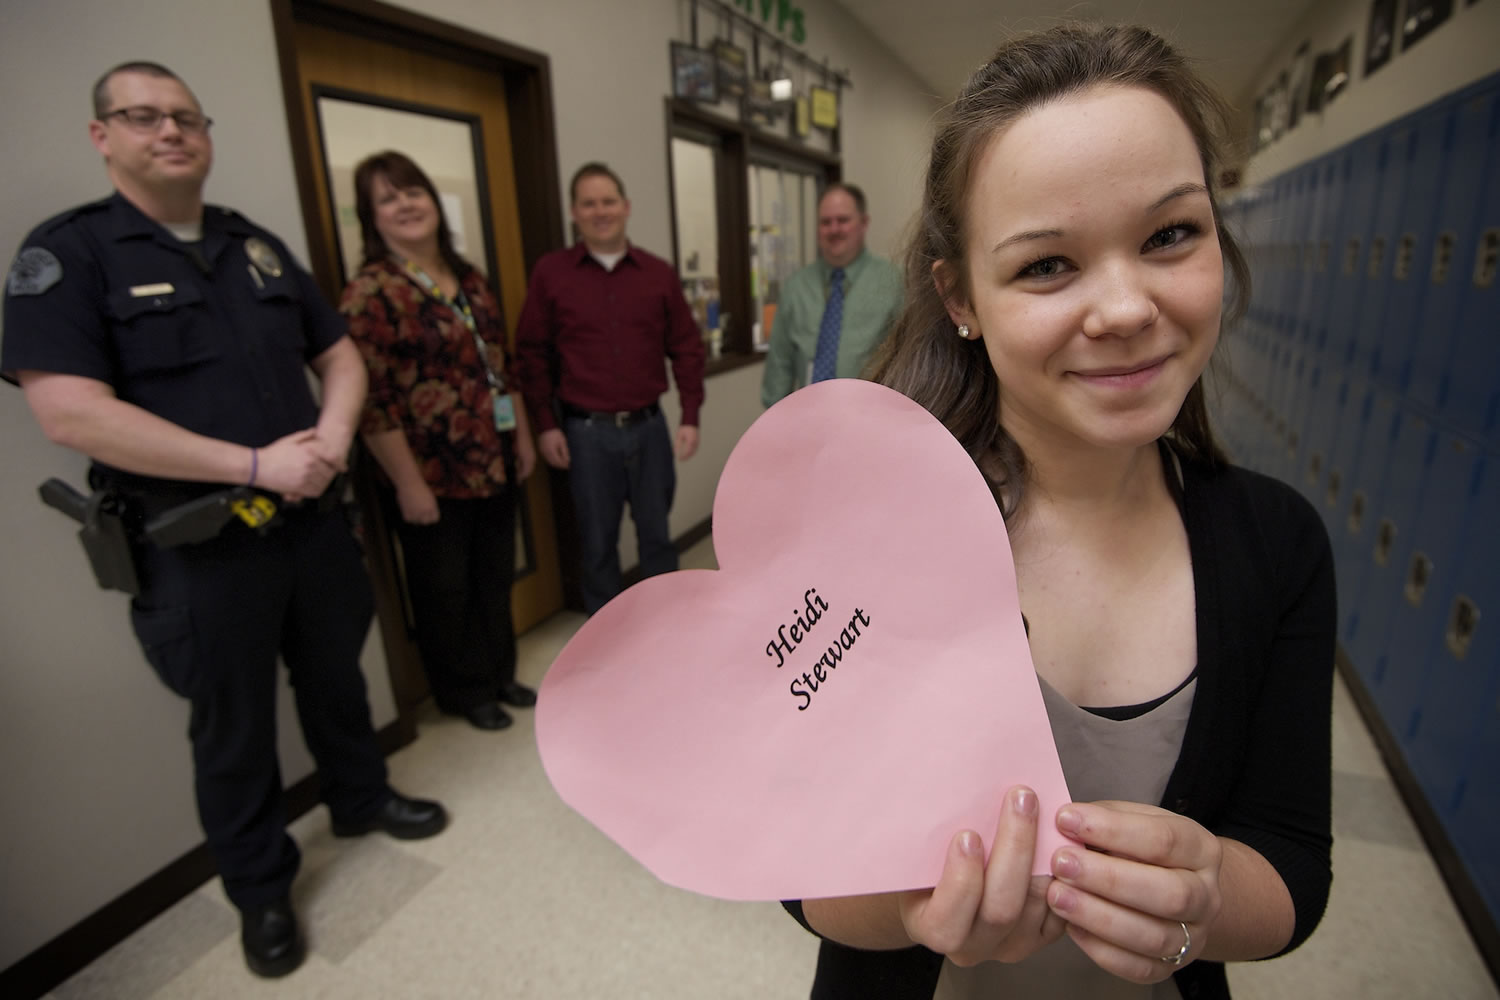 Heidi Stewart, 18, a senior student at Evergreen High School, holds a paper heart with her name printed on it. She collapsed at school in February after suffering sudden cardiac arrest. Helping her that day, from left to right, are Eric McCaleb, Dianna Lynch, Reuben Dohrendorf and Marshall Pendleton.